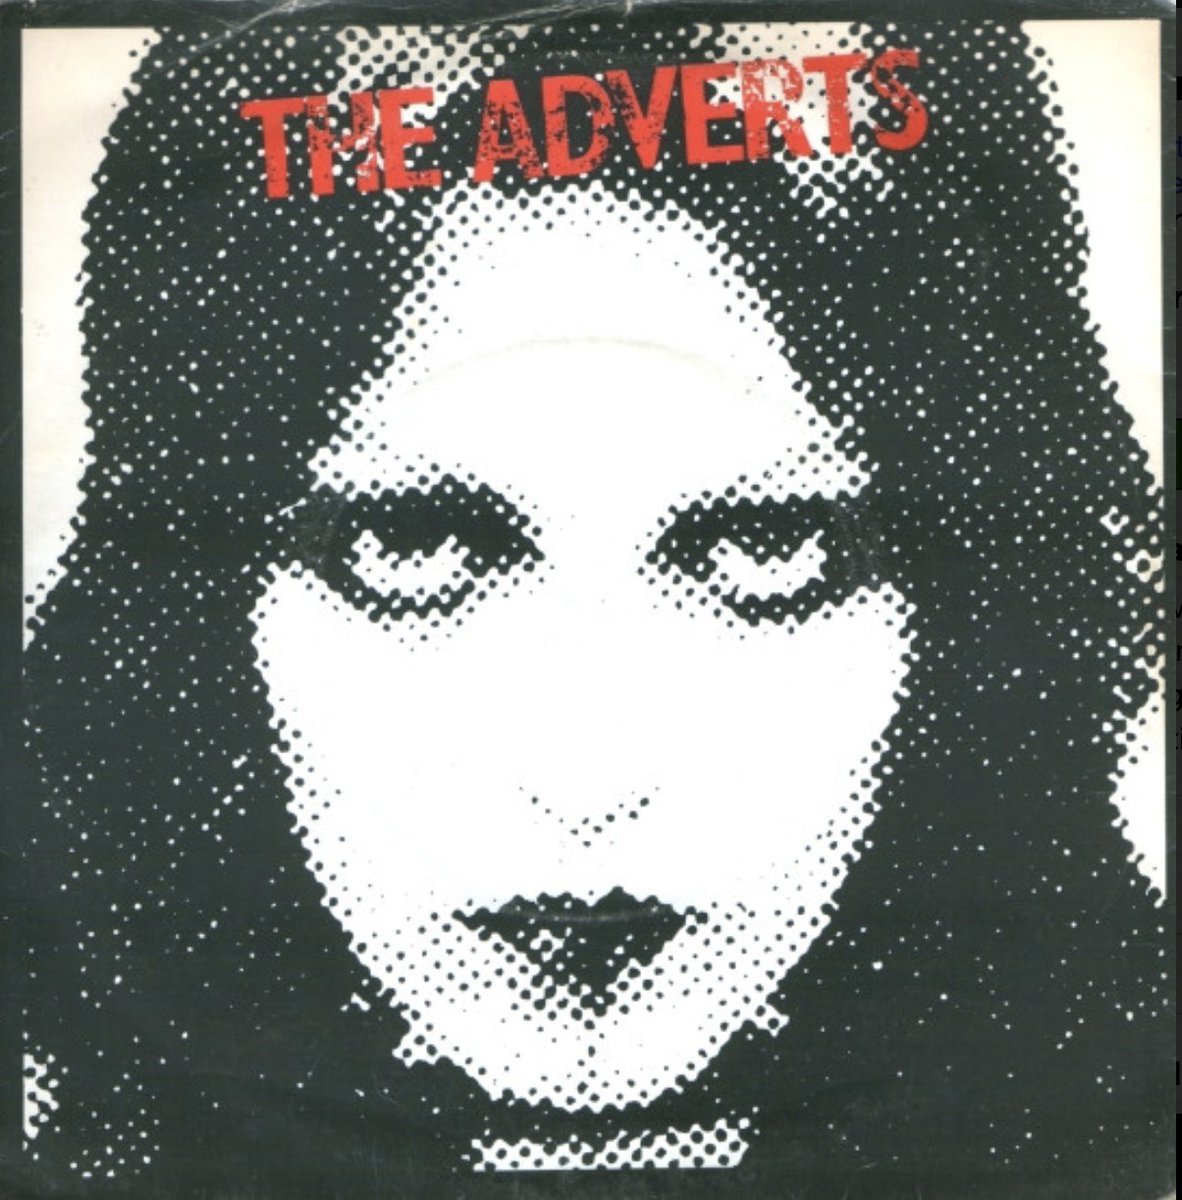 Released 47 years ago this week 'One Chord Wonders' the debut single from #TheAdverts